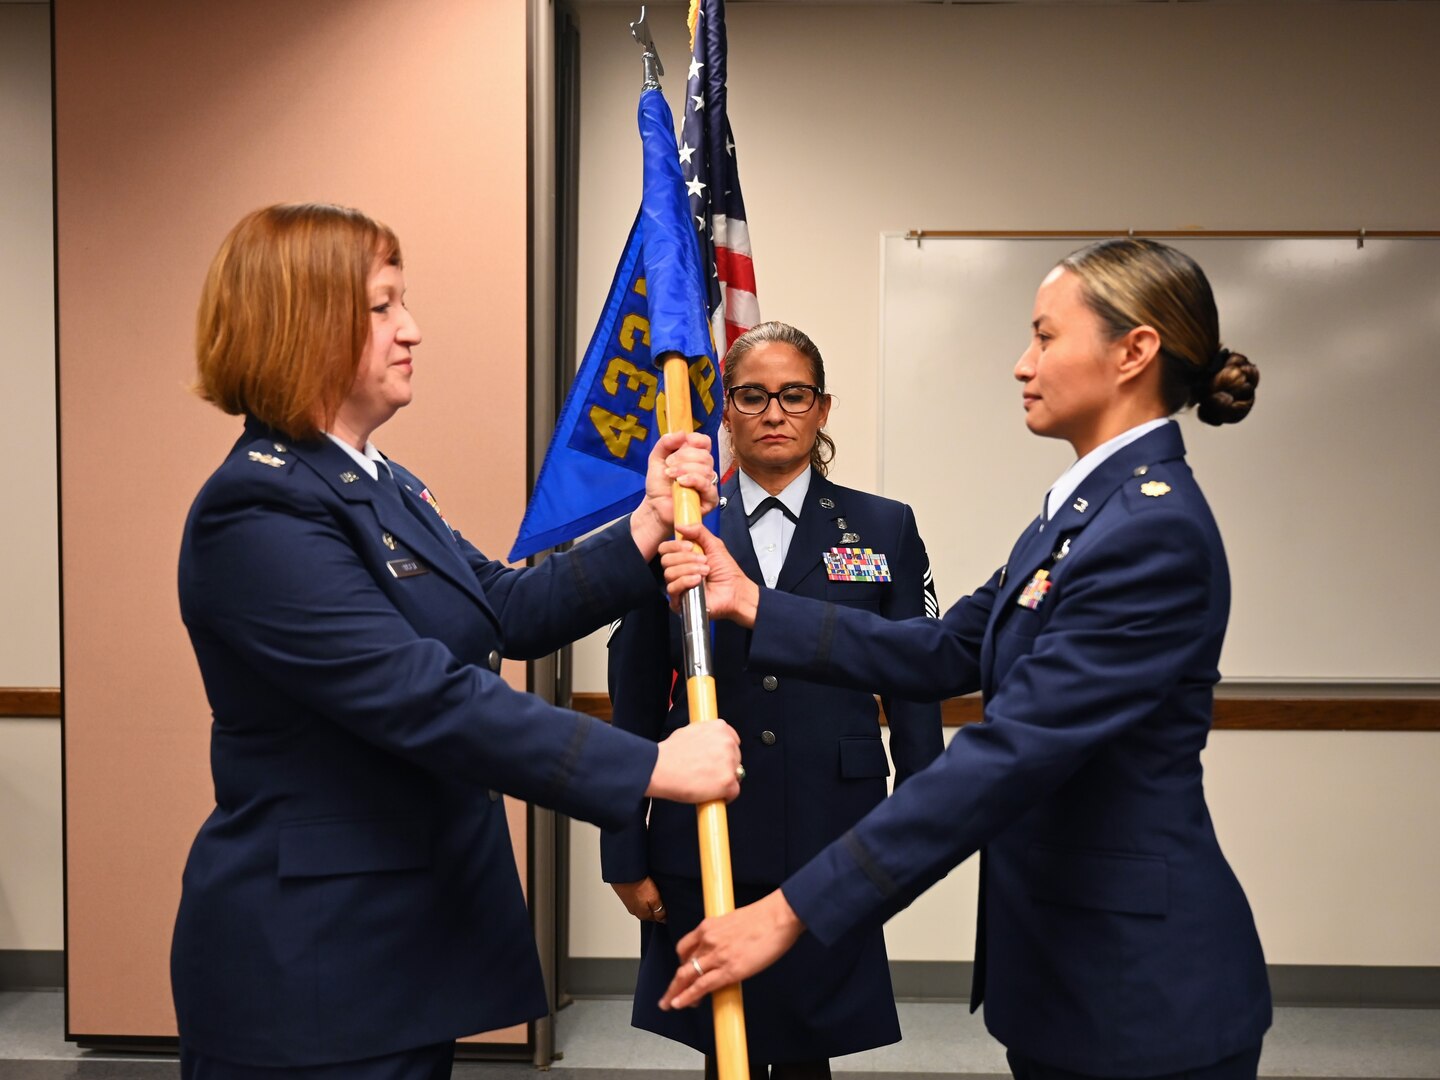 Col. Jeanne Bisesi, left, 433rd Mission Support Group commander, passes the 74th Aerial Port Squadron guidon to Maj. Valerie A. Mafnas, right, signaling her assumption of command on April 1, 2023.